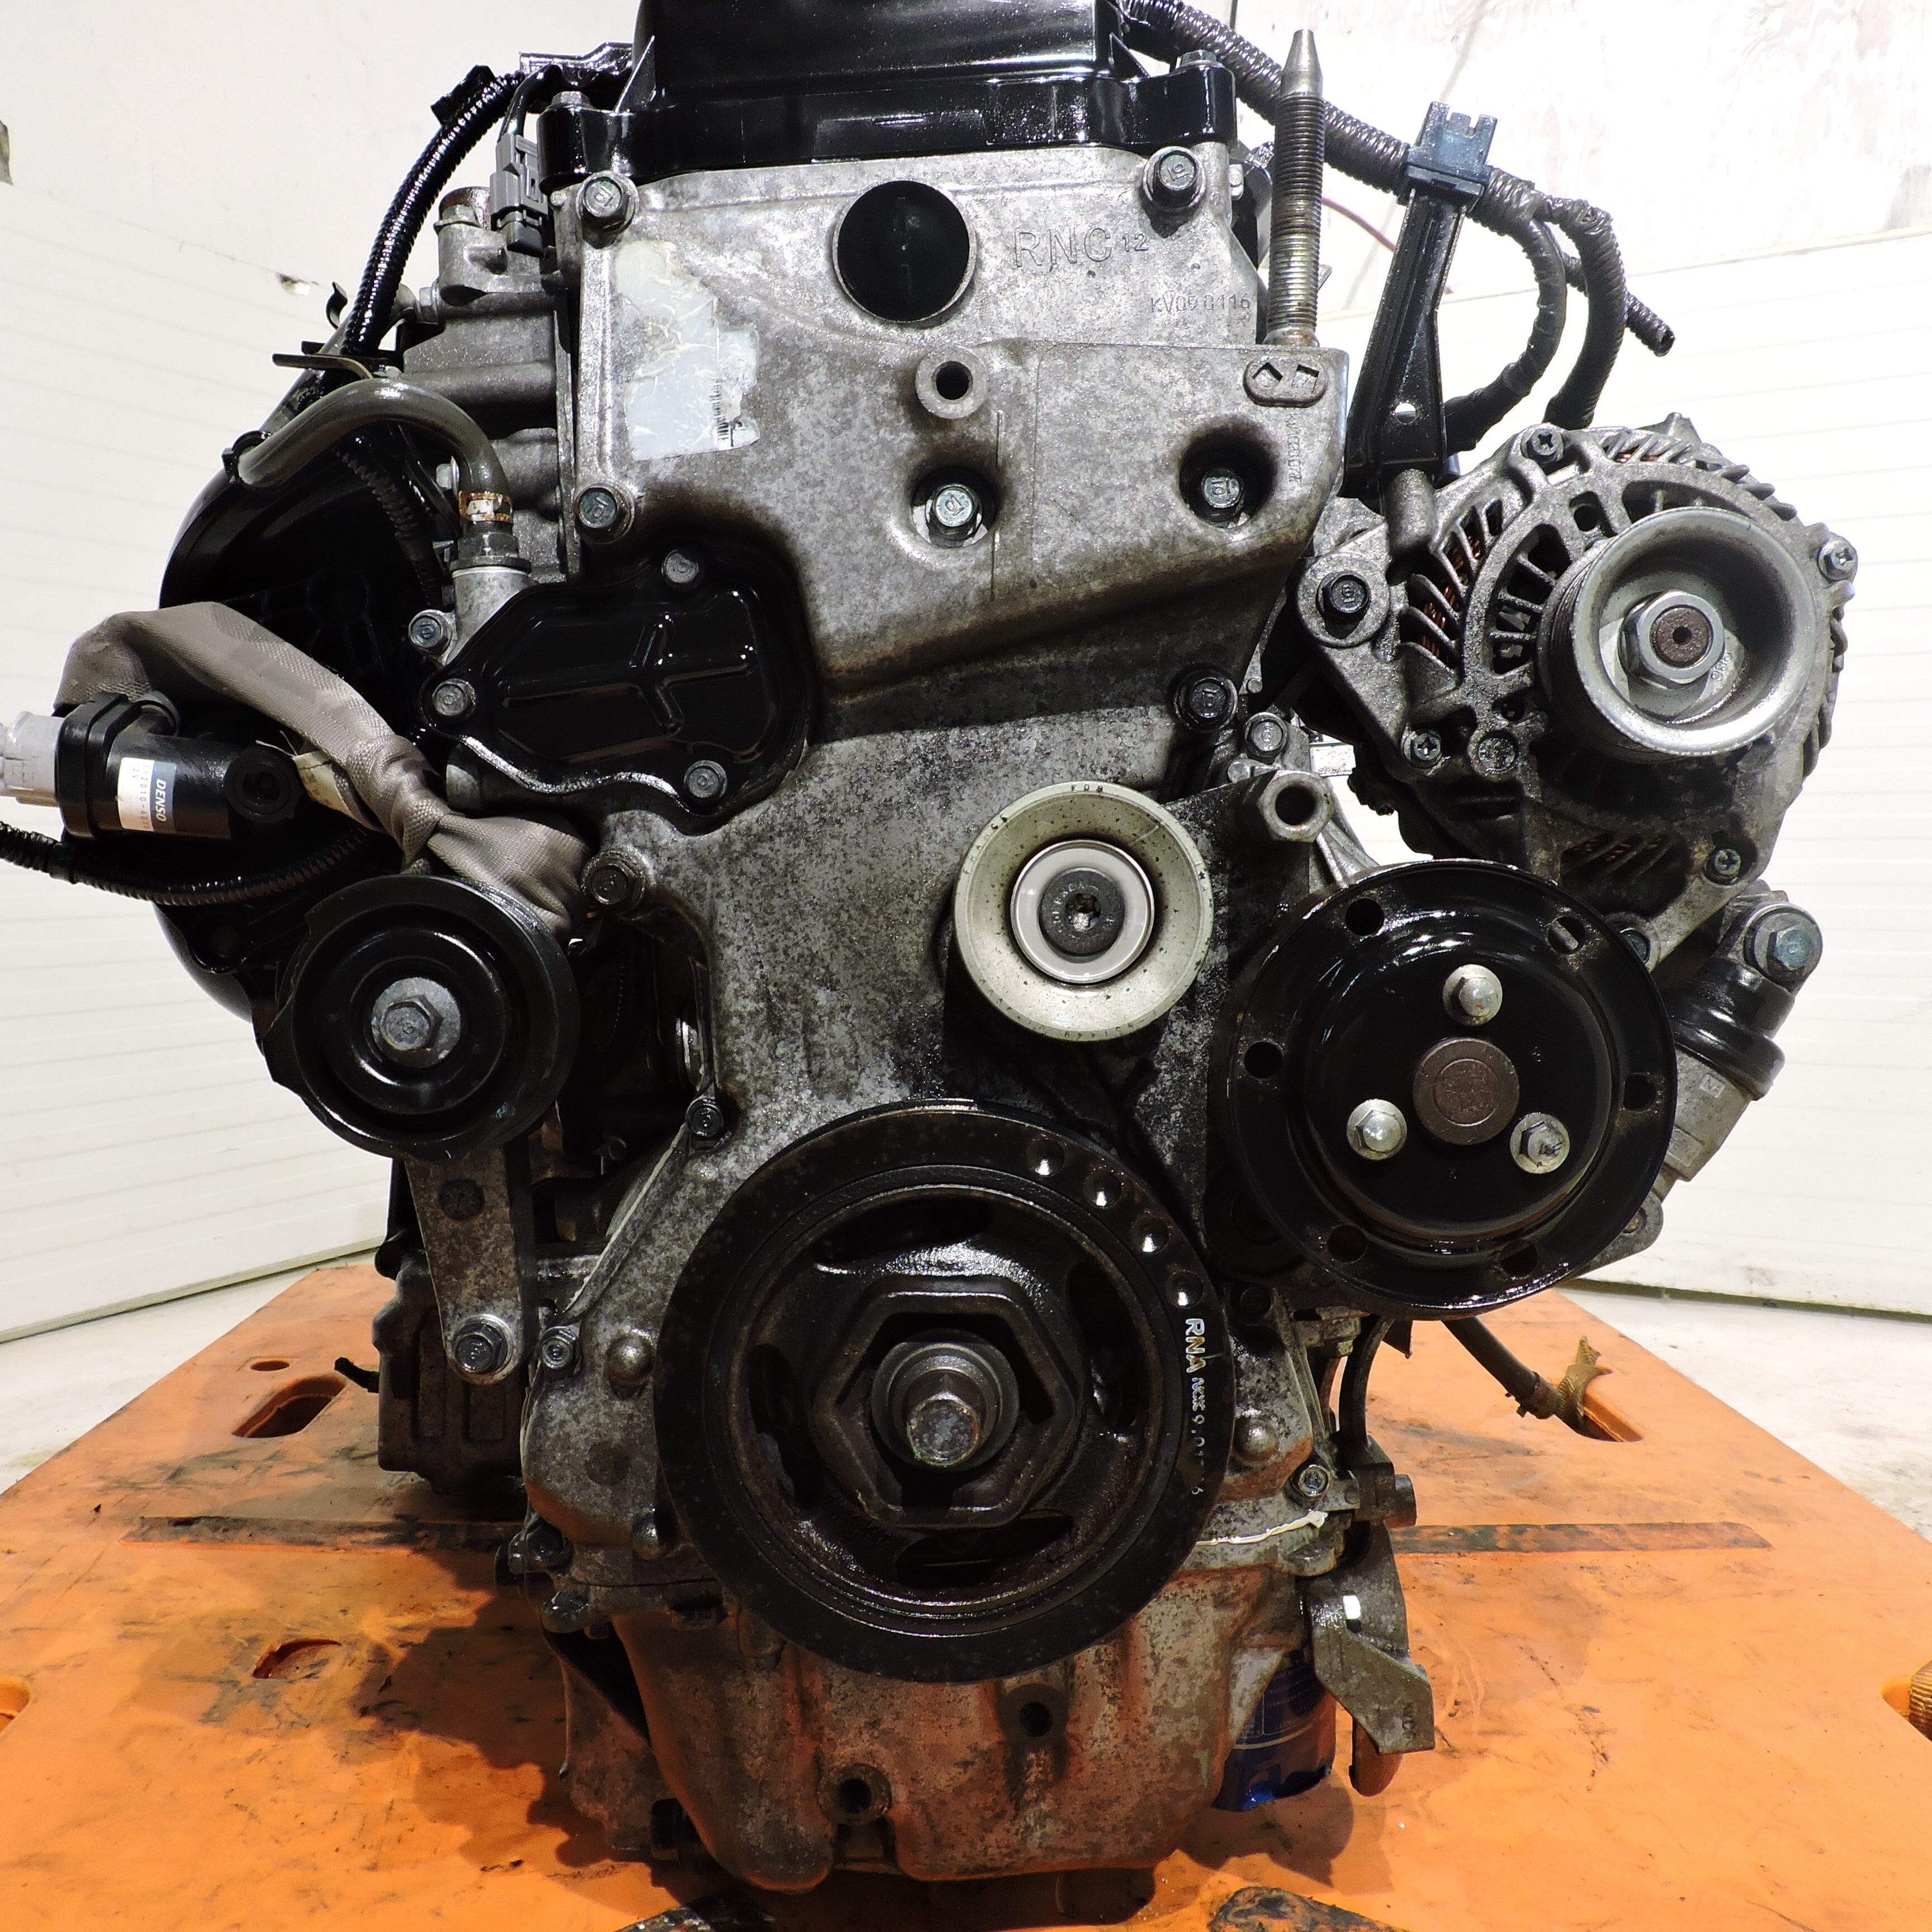 Acura ILX 2013-2015 2.0L Sohc Vtec JDM Engine Only - R20A